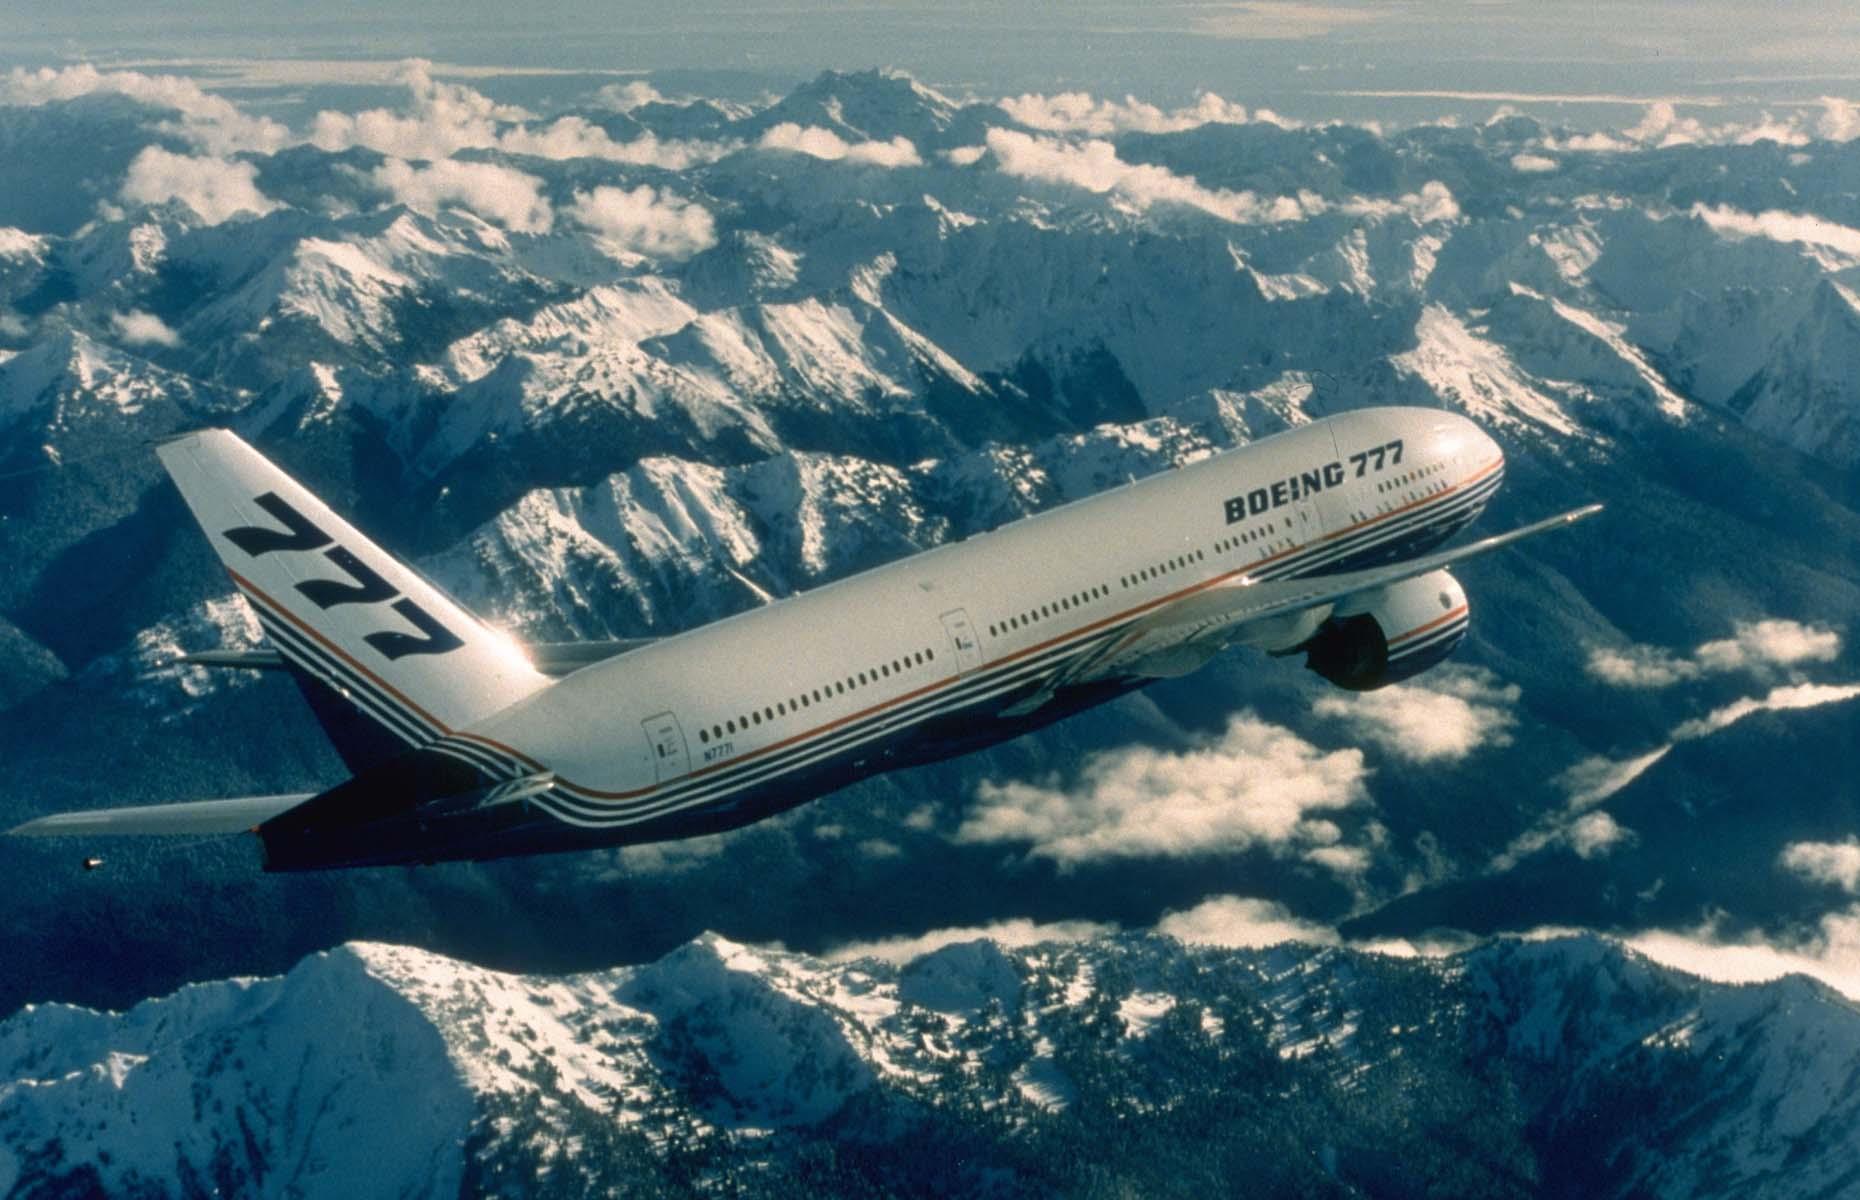 It was built in consultation with eight major airlines, including United Airlines and Emirates. The former was responsible for the aircraft's maiden flight on 7 June 1995, and orders for this widely-used model and its modern variants, like the 777X, are still coming in today. As of October 2021, more than 2,000 have been sold, including nearly 400 aircraft still to be delivered.